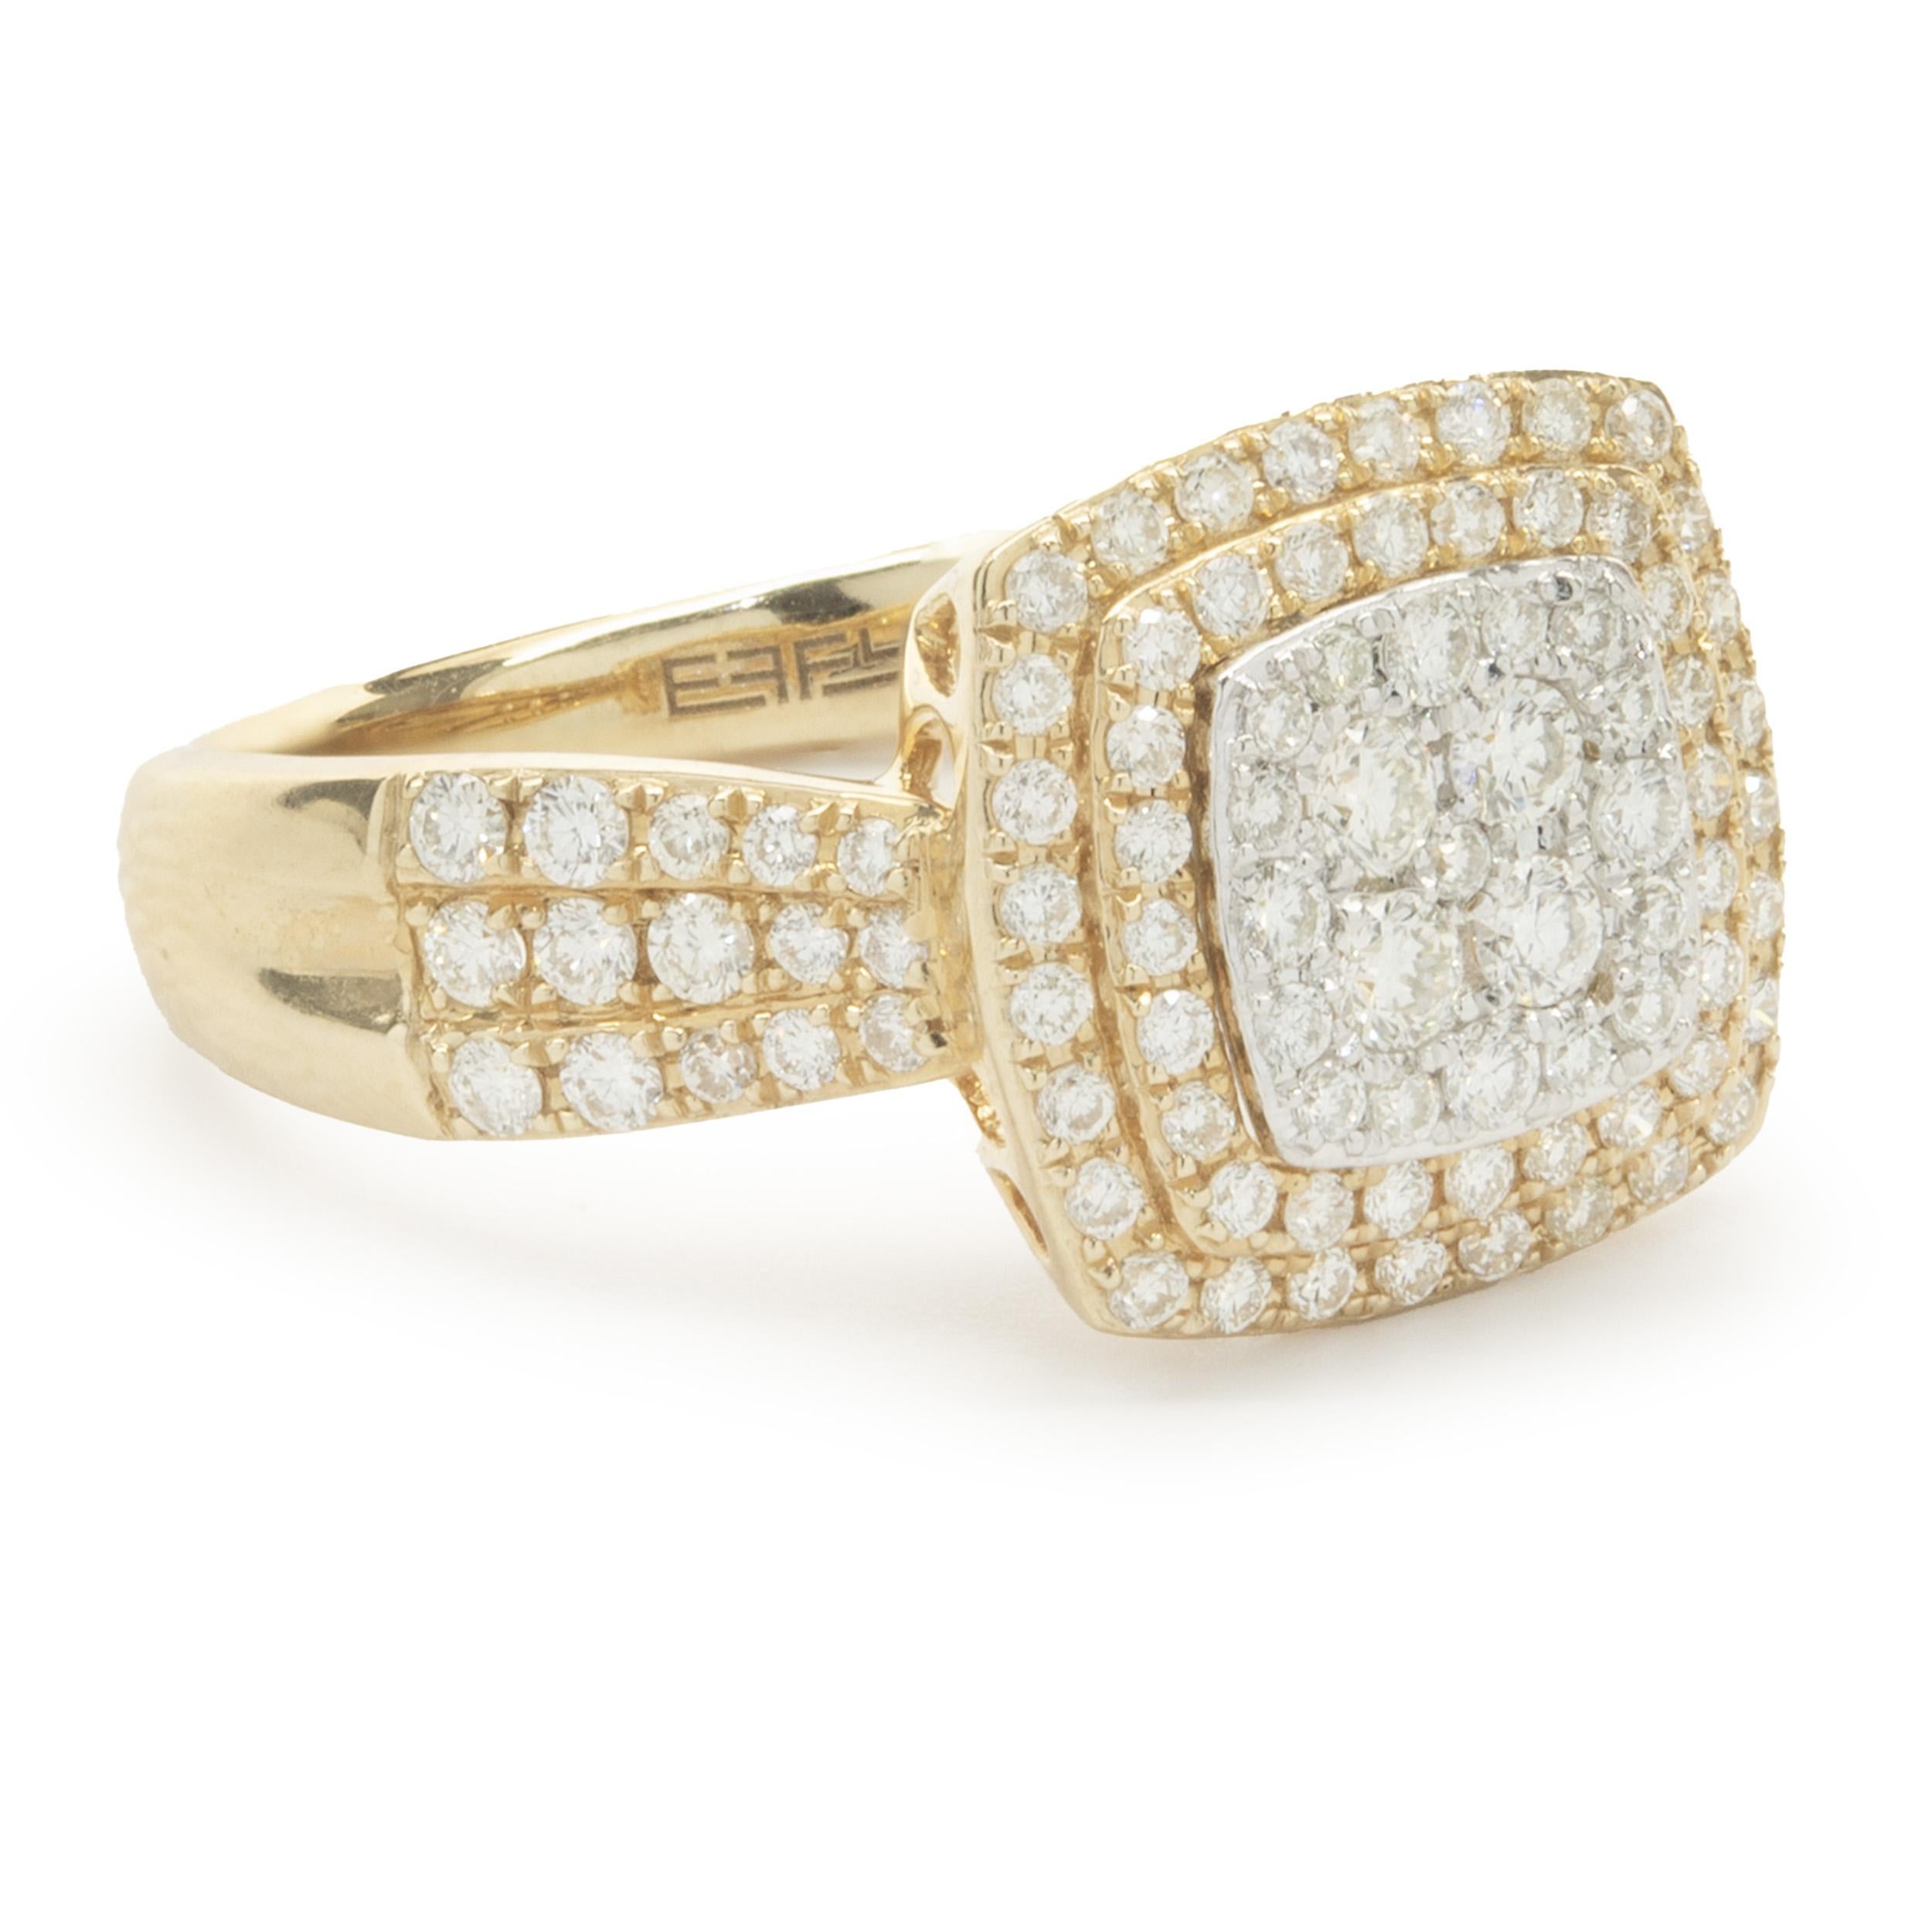 Designer: custom design
Material: 14K yellow gold
Diamonds: 80 round brilliant cut = 1.00cttw
Color: H
Clarity: SI1
Dimensions: ring top measures 12mm wide
Size: 7
Weight: 4.00 grams
